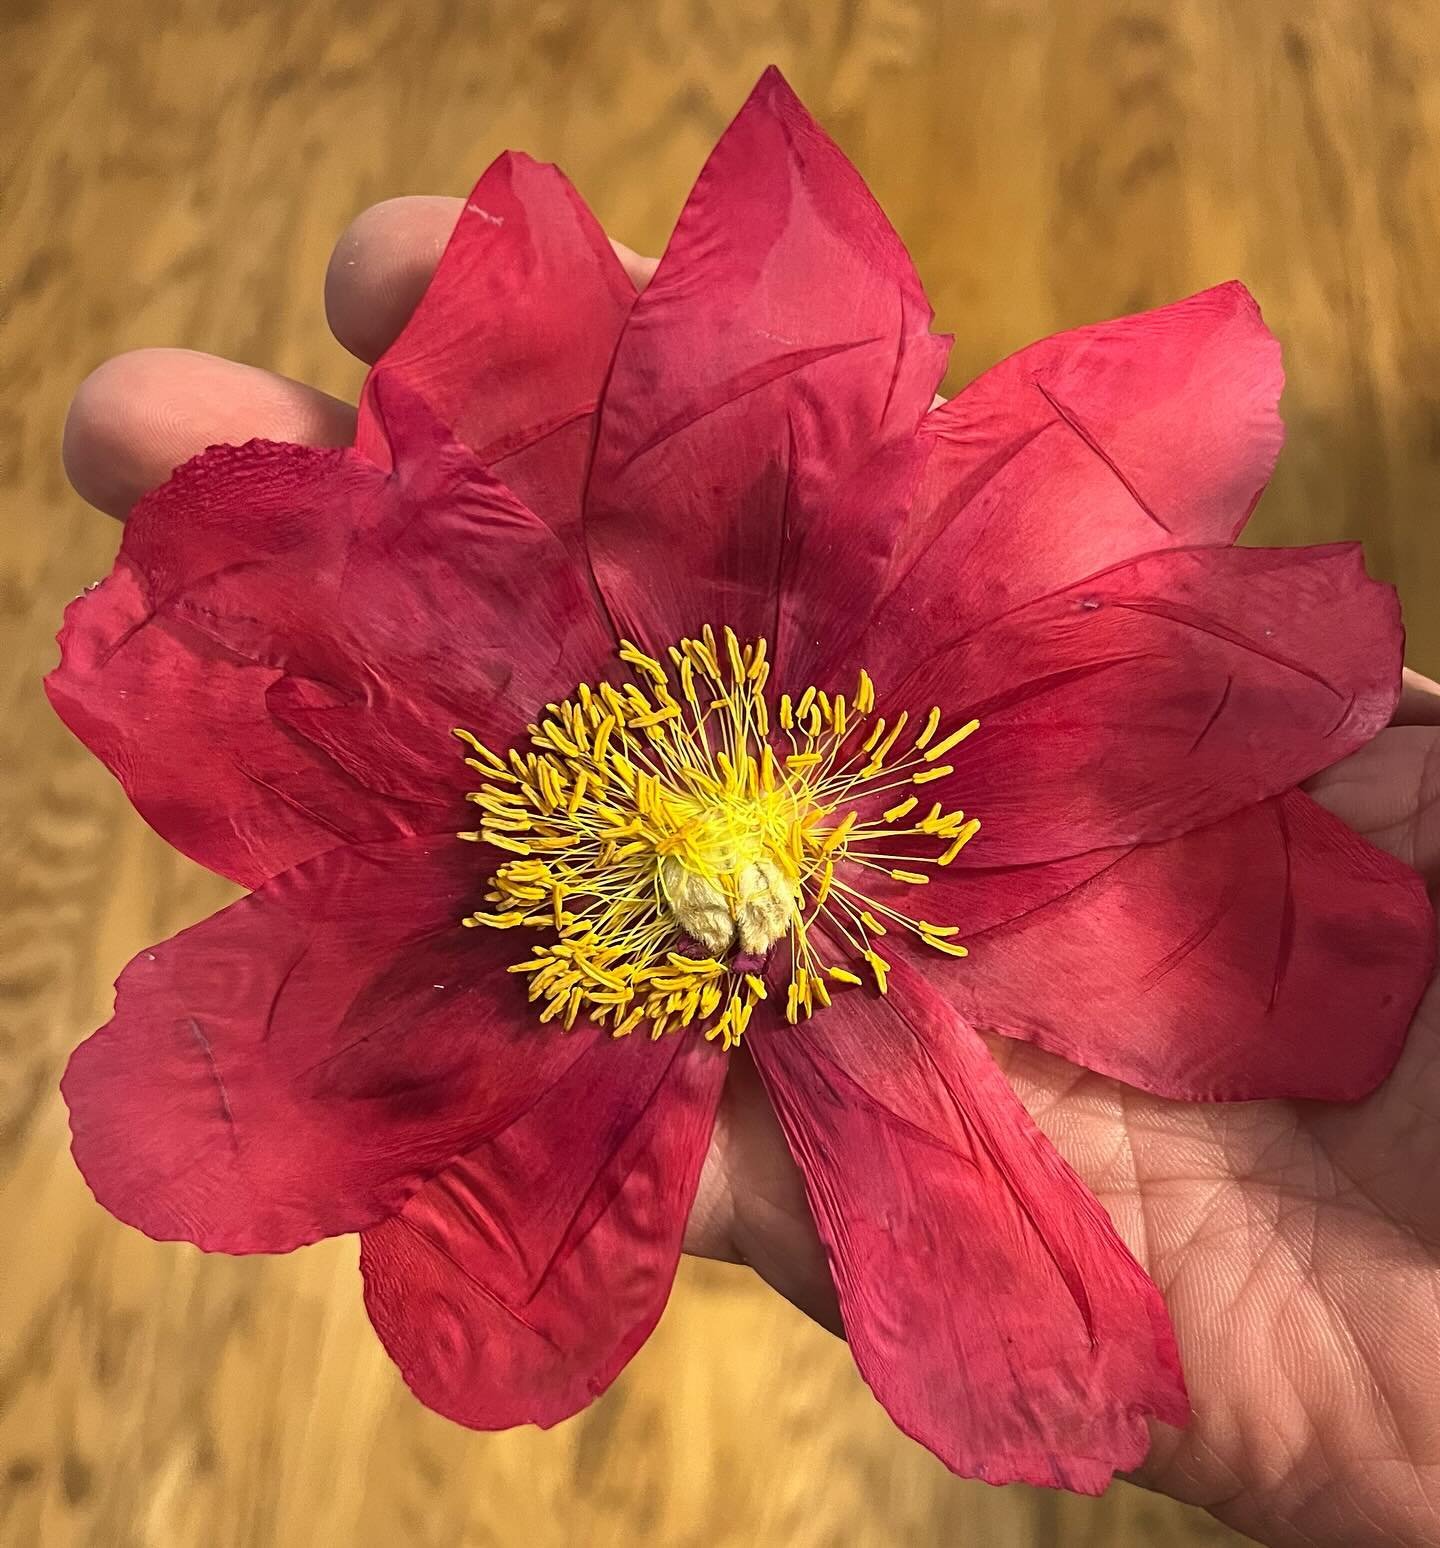 Just look at the color and dimension on this pressed peony. I&rsquo;m growing them and pressing one at a time as they bloom so I can perfect my technique on more complex flowers before I offer bridal bouquet preservation. I think I have color preserv